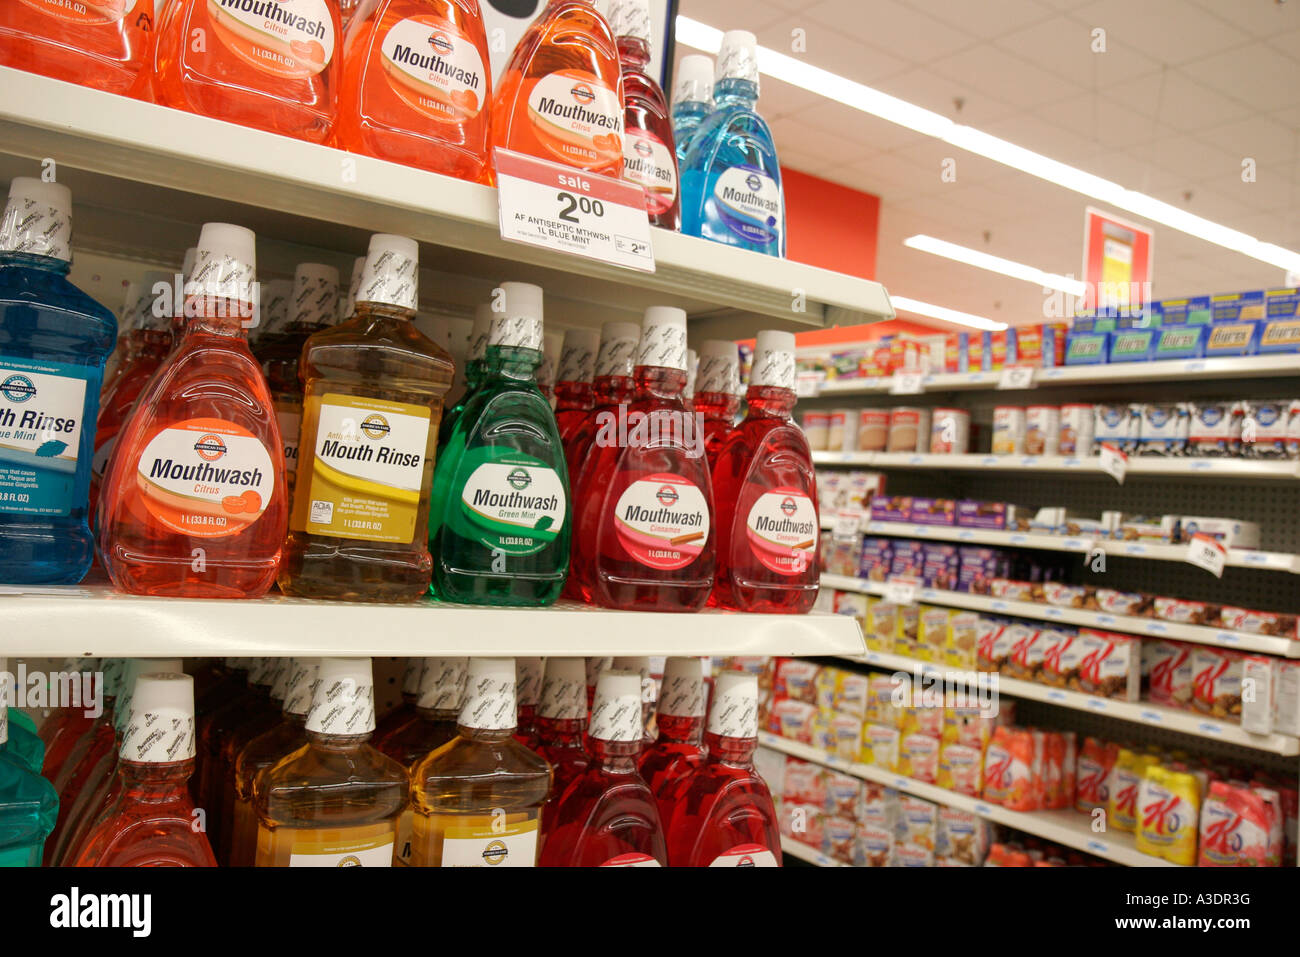 North Miami Beach Florida,Kmart,display sale,prices,pricing,mouthwash,mouth rinse,flavors,fresh breath,FL070125029 Stock Photo